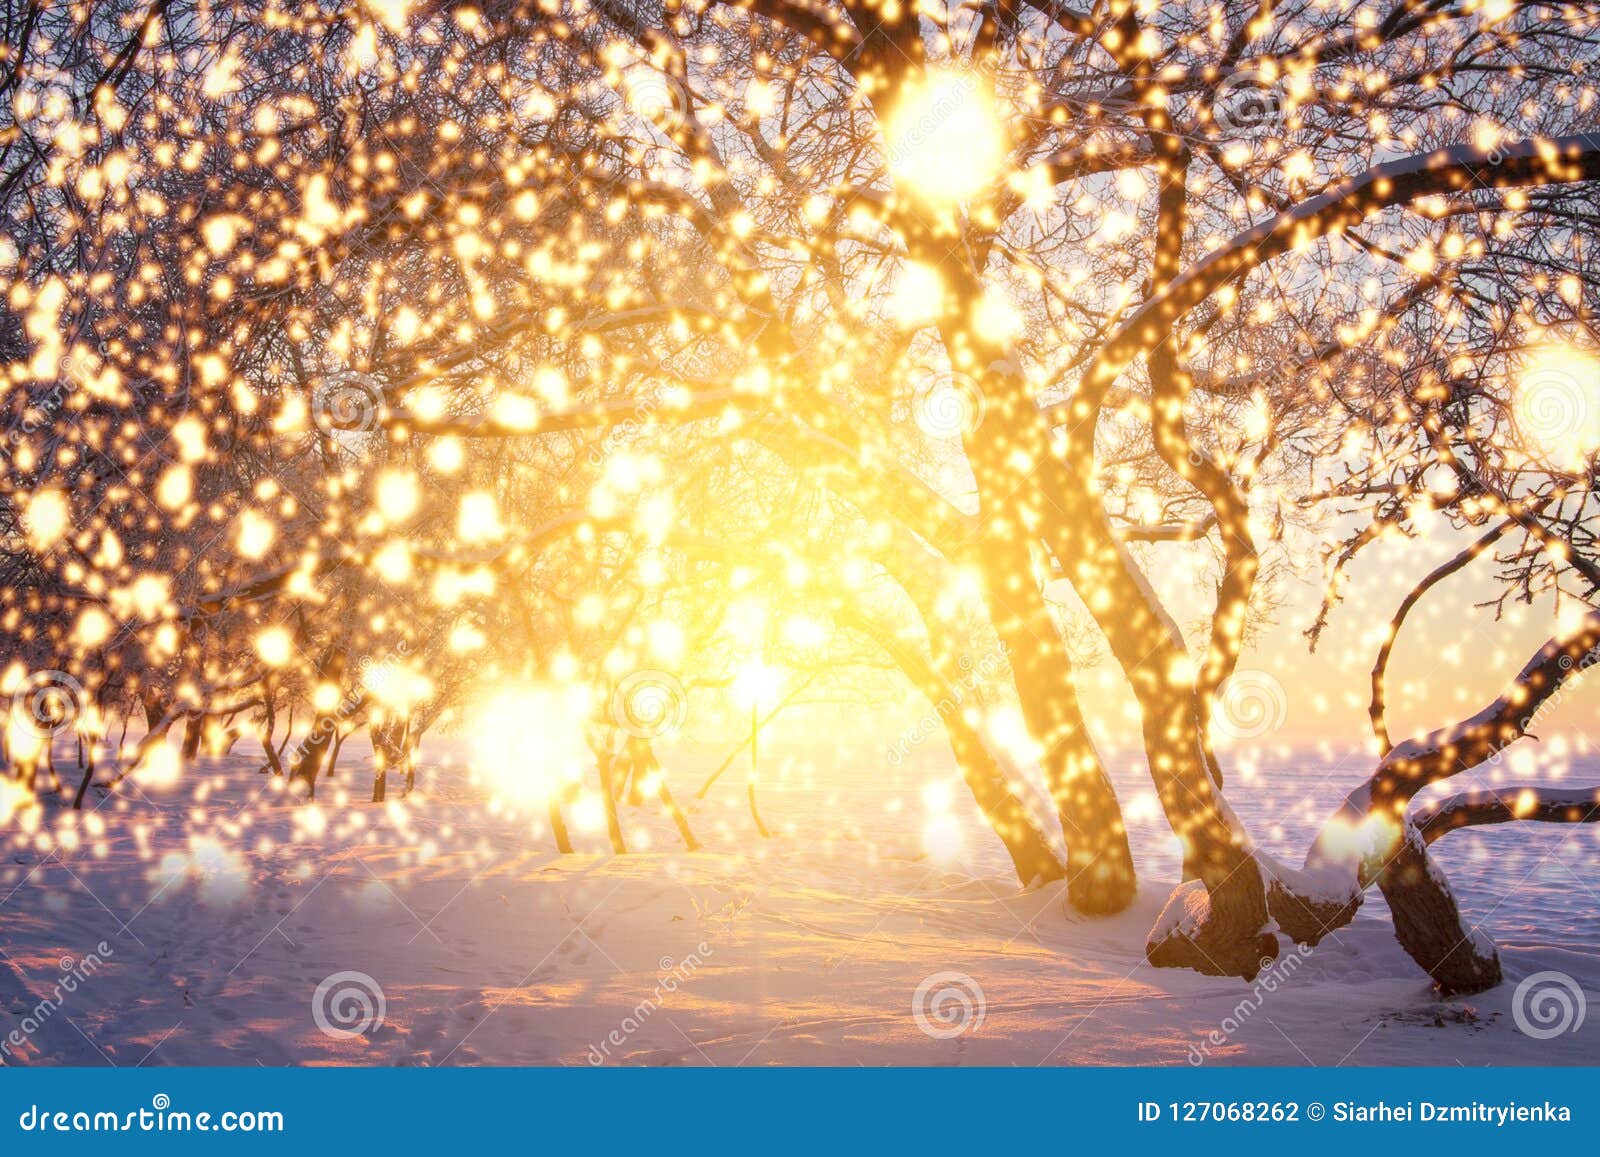 Christmas Background with Glowing Snowflakes. Shining Magic Lights in Nature. Scenery Winter Fairytale. Stock Photo - Image of happy, shine: 127068262